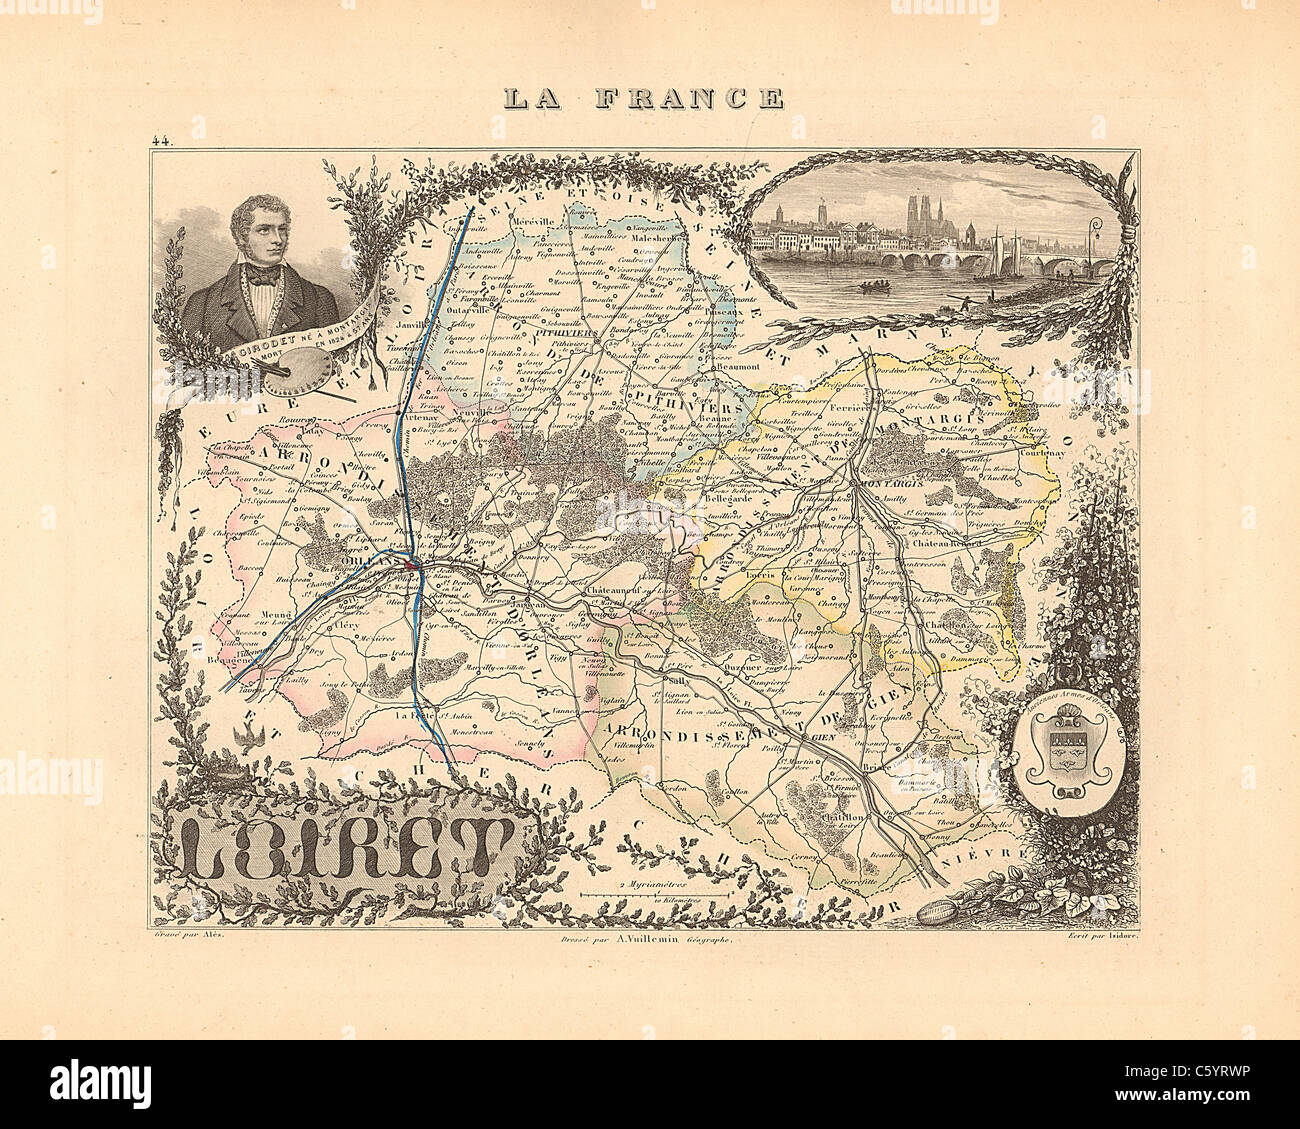 Loiret Department -  Antiquarian Map from an 1858 French Atlas 'France and its Colonies' (La France et ses Colonies ) by Alexandre Vuillemin Stock Photo